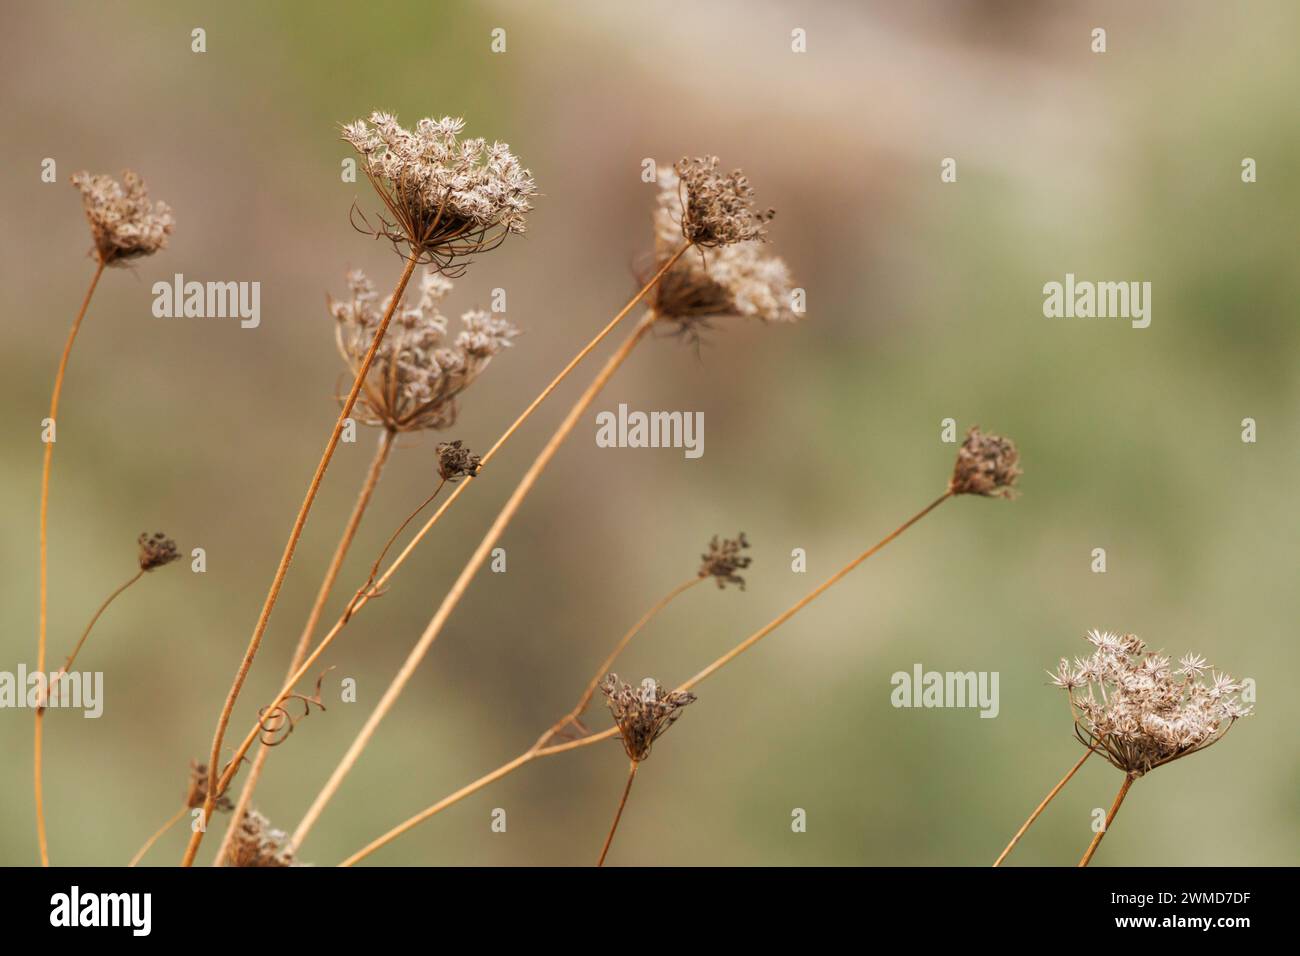 Weeds in agriculture field during winter, Alcoy, Spain Stock Photo